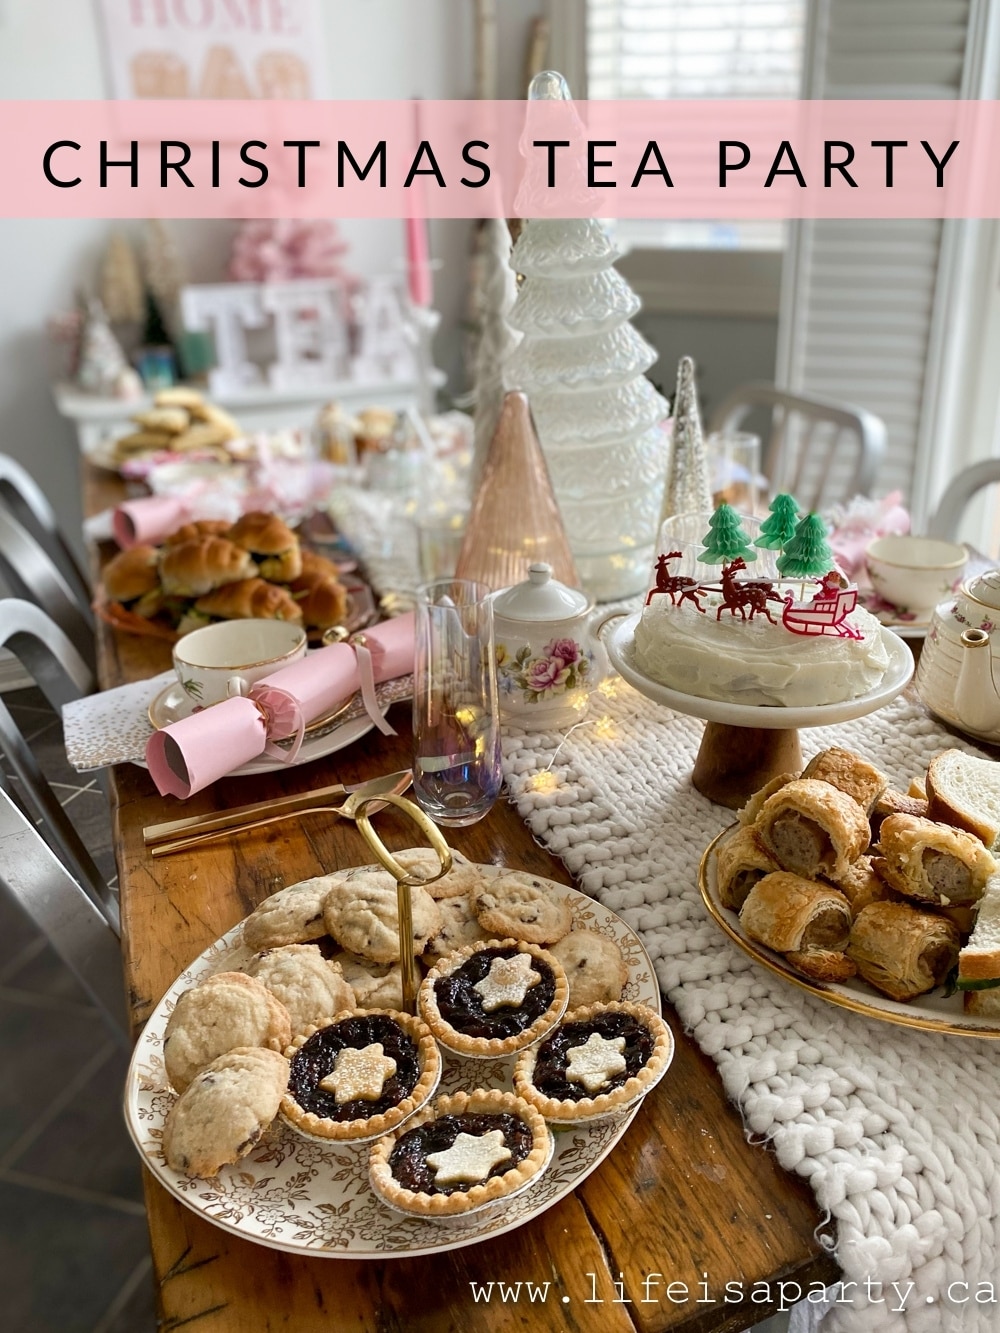 Christmas Tea Party: a British inspired Christmas tea party menu, complete with recipes and decor ideas for high tea.